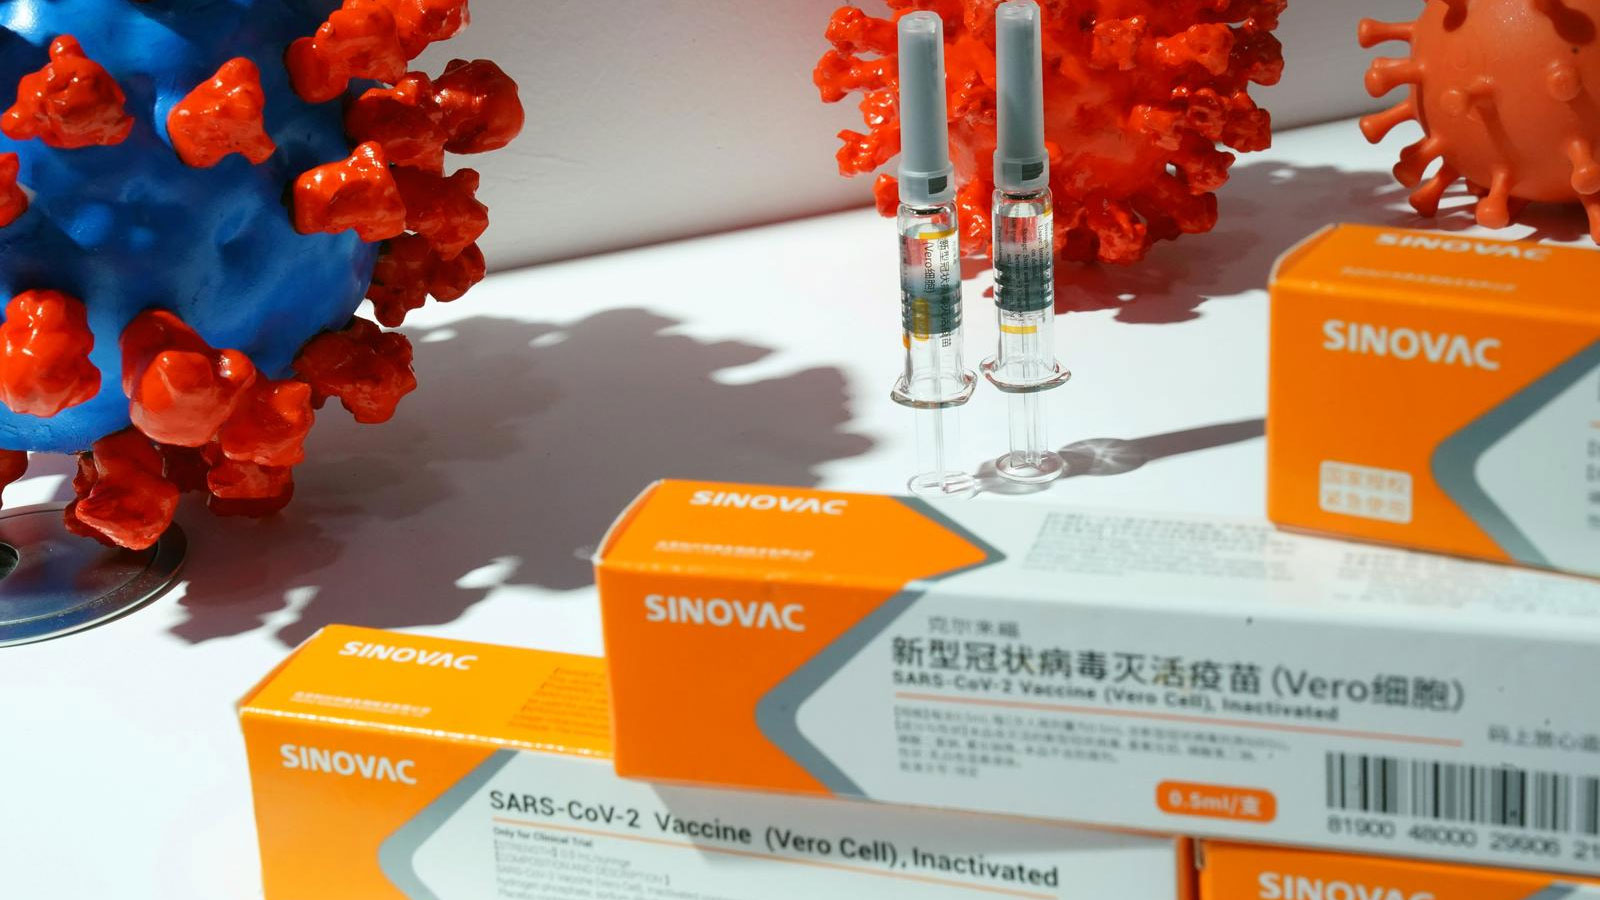 Chinese Covid-19 vaccine expected to arrive on Dec. 24